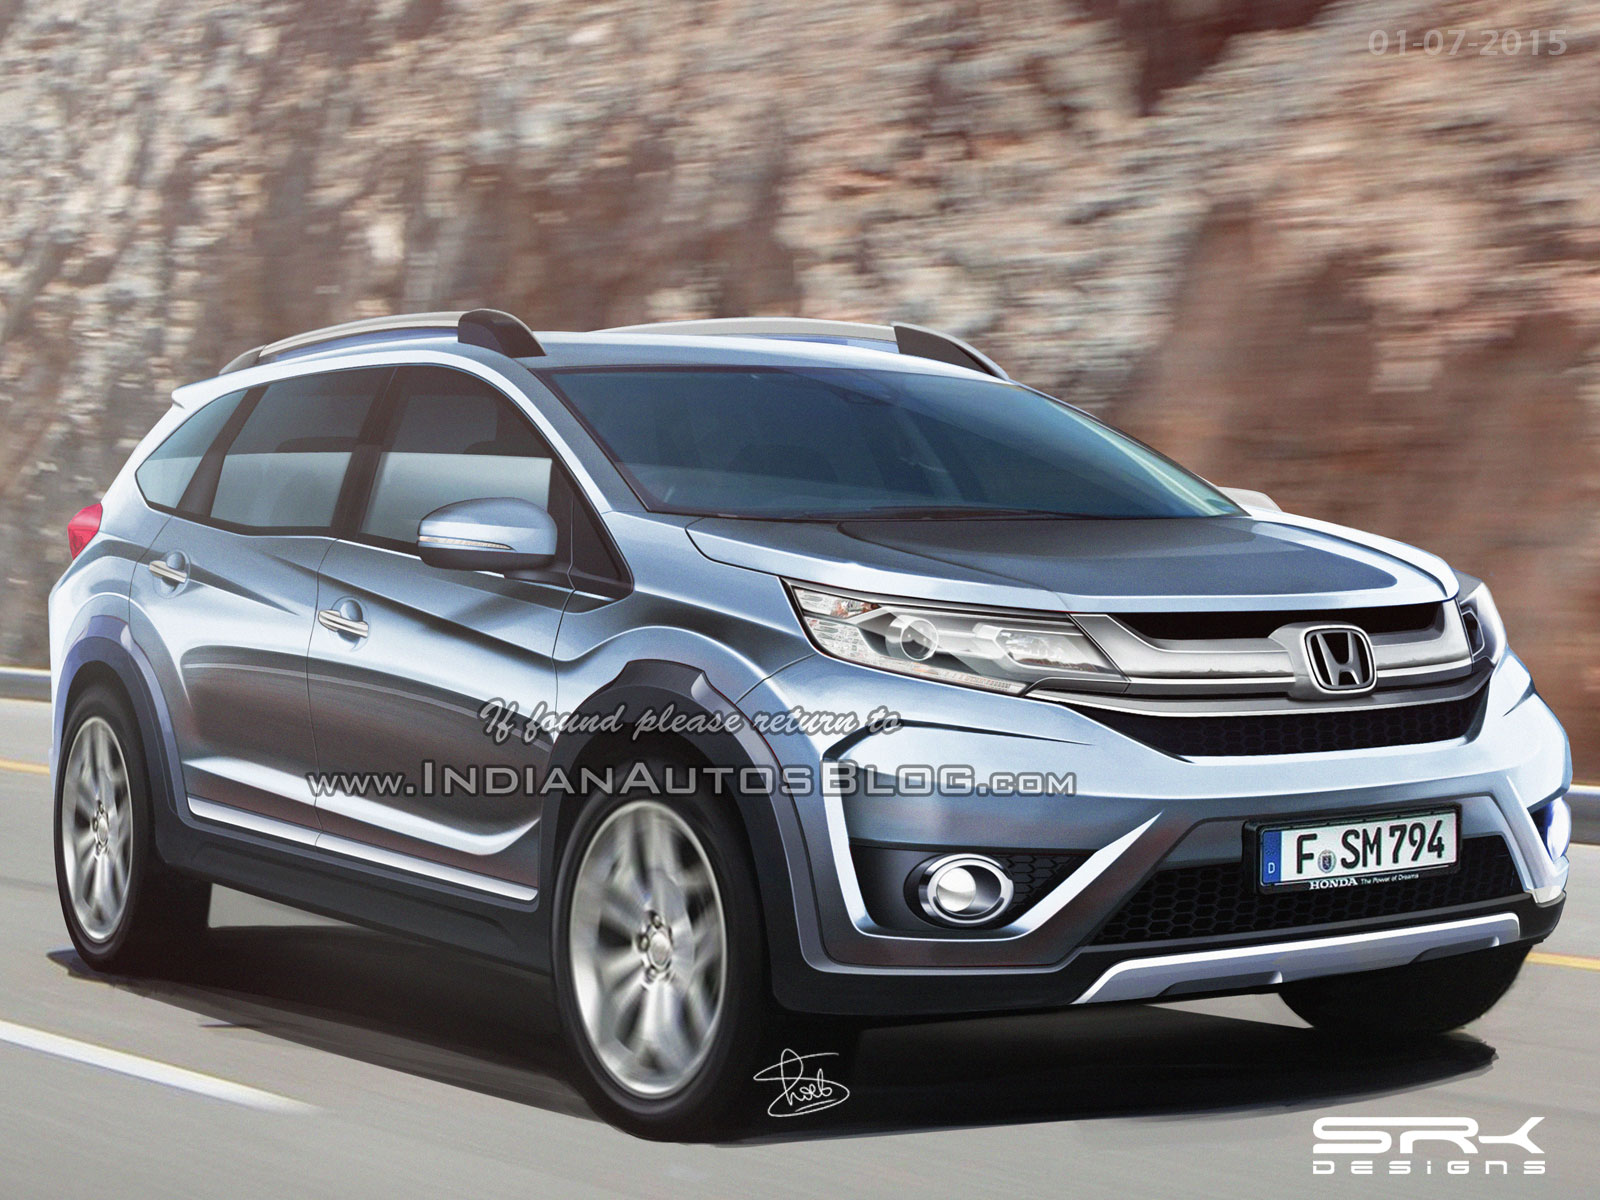 The All New Honda BR-V Renders And Speculated Price ...